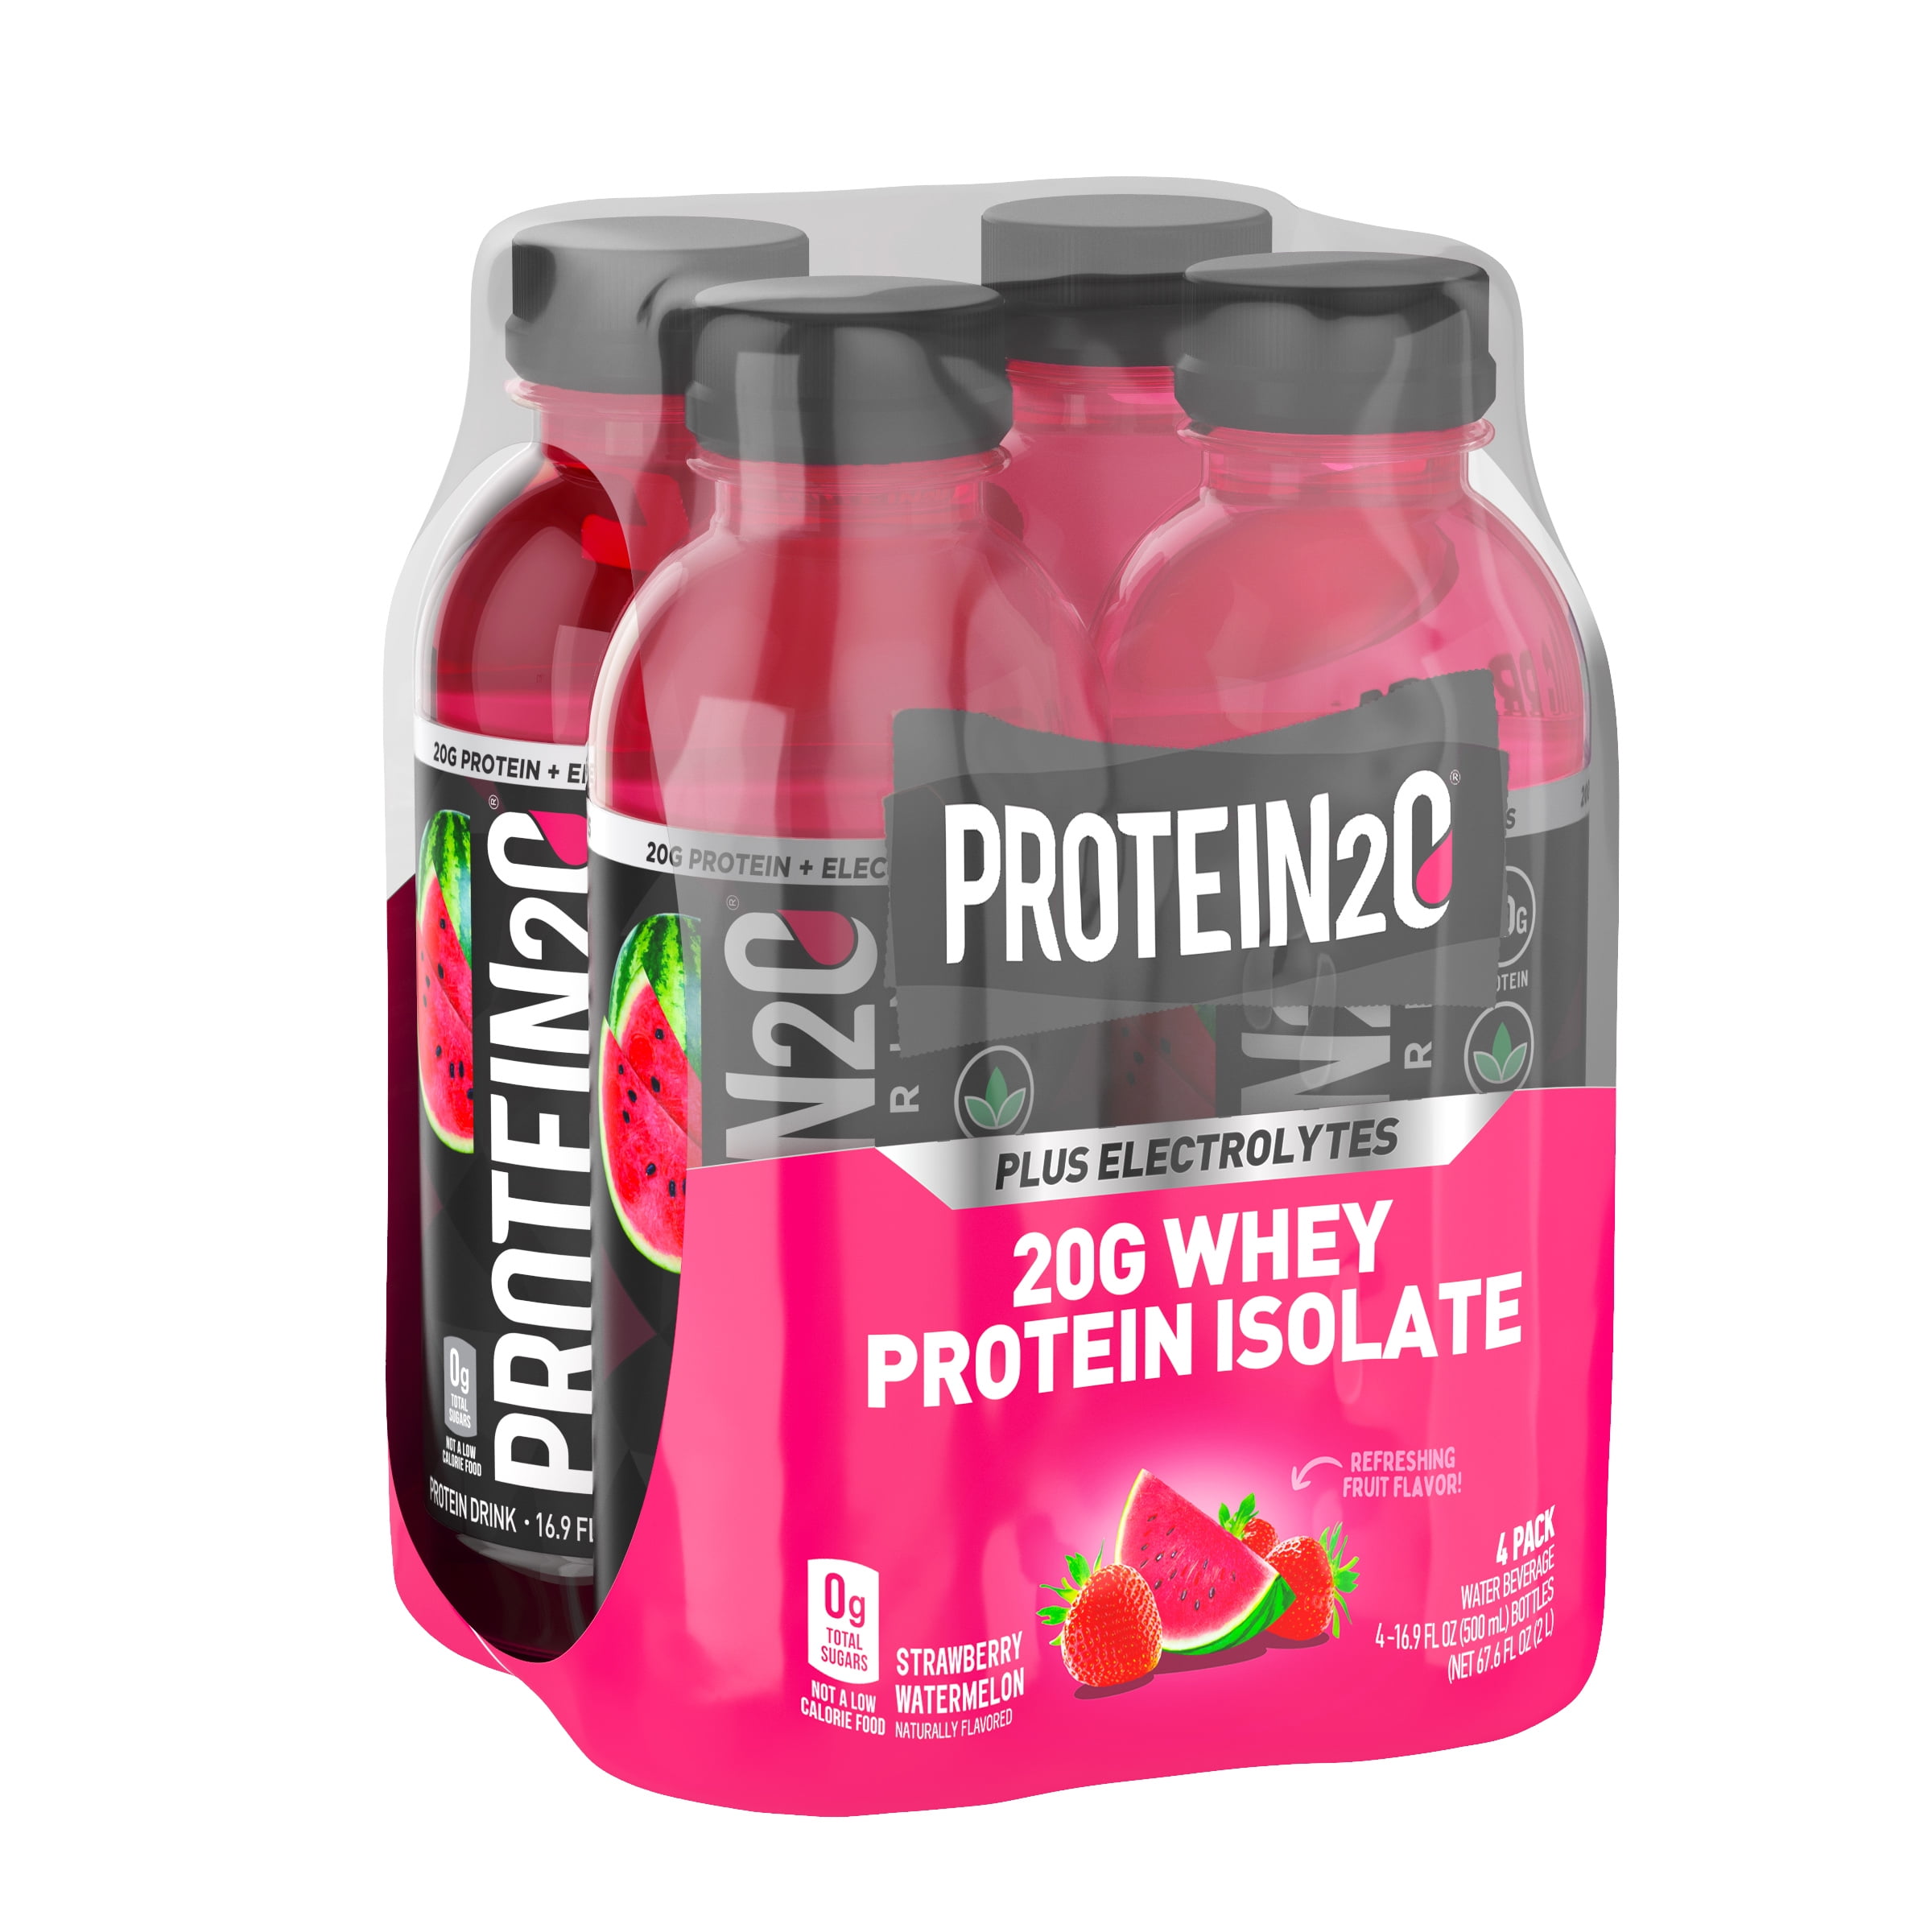 Protein2o 15g Whey Protein Infused Water, Wild Cherry, 16.9 oz Bottle (Pack  of 12) 